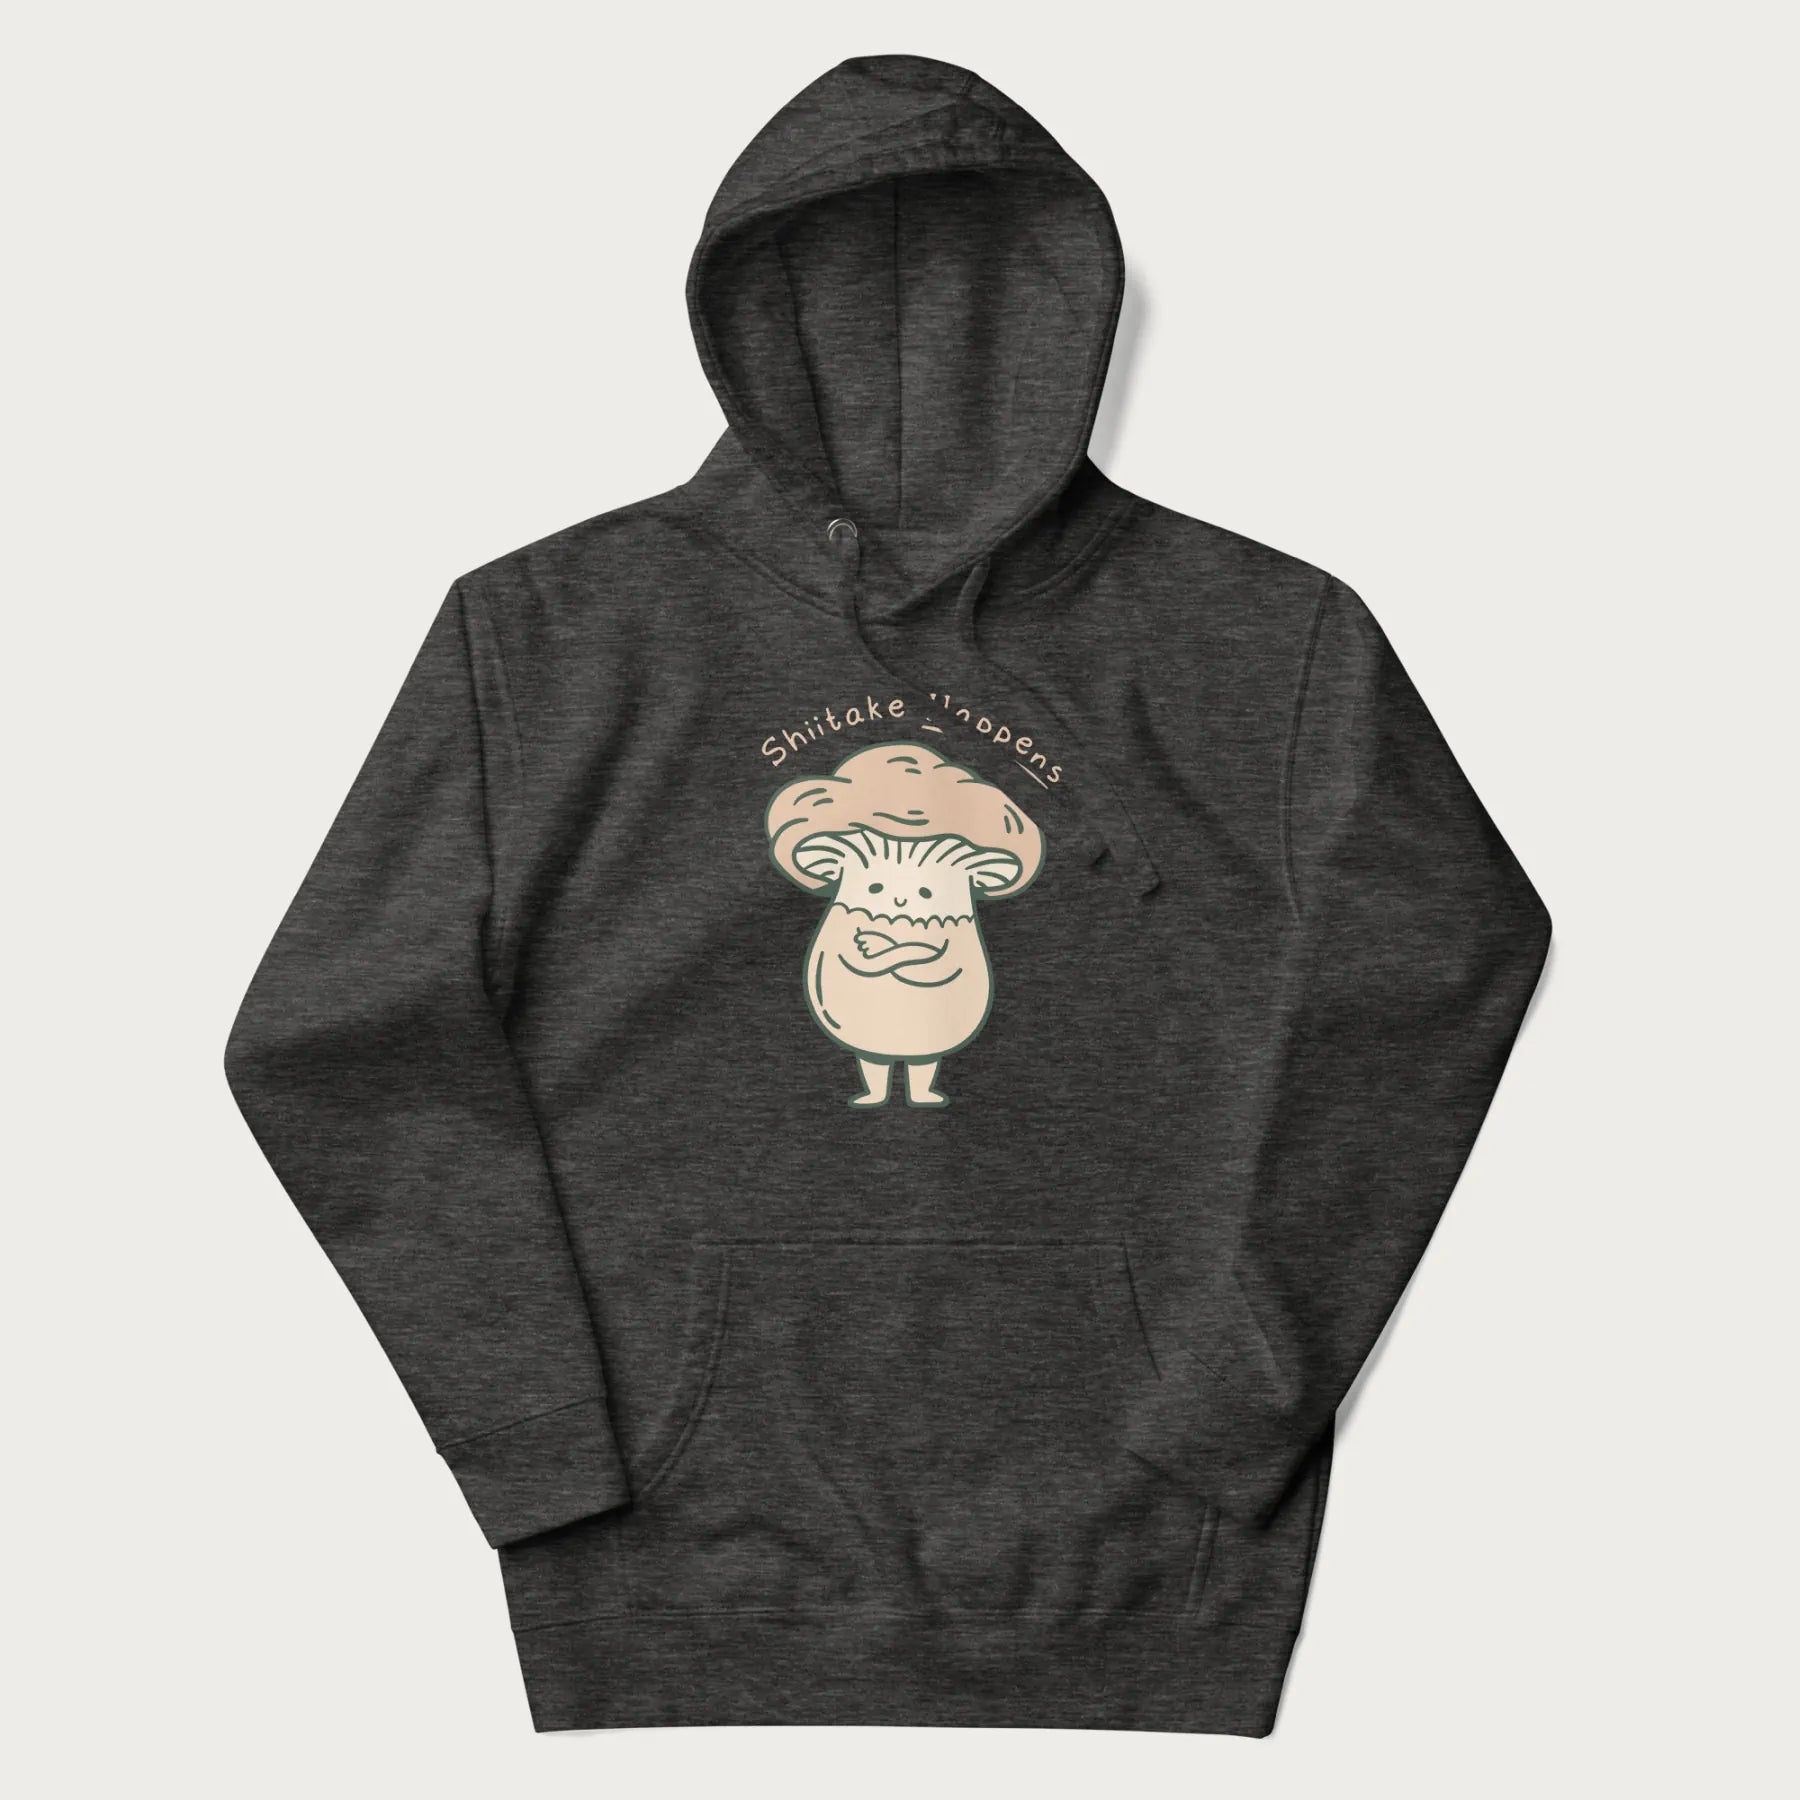 Dark grey hoodie with a graphic of an adorable mushroom character and the text 'Shiitake Happens'.